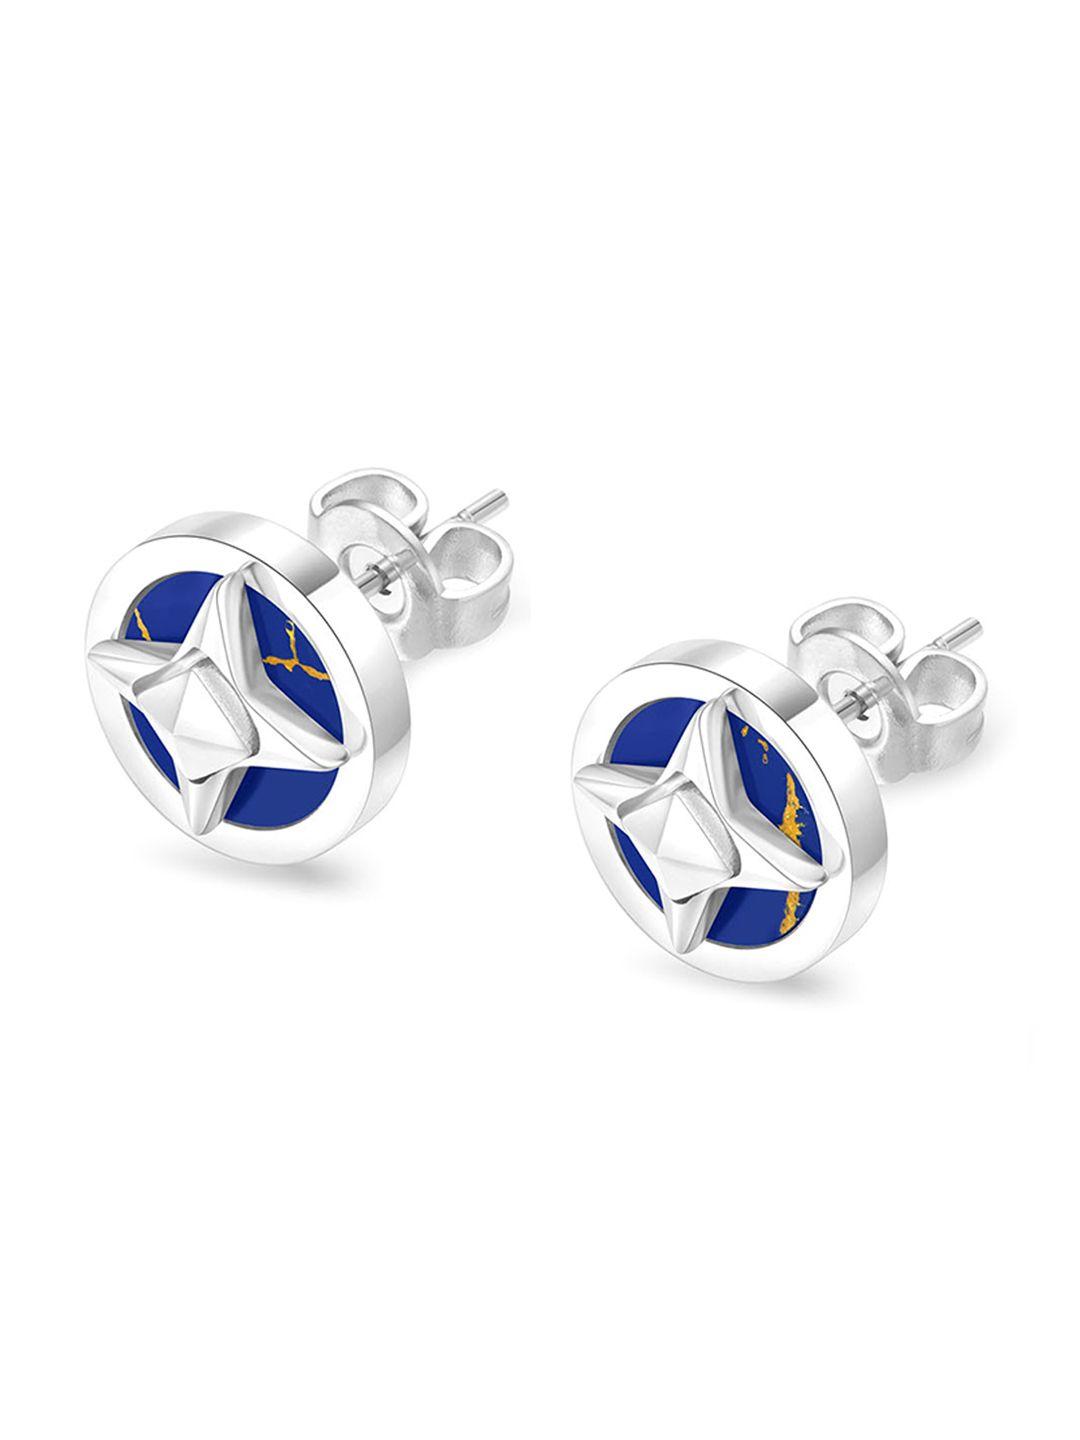 police silver-plated circular studs earrings